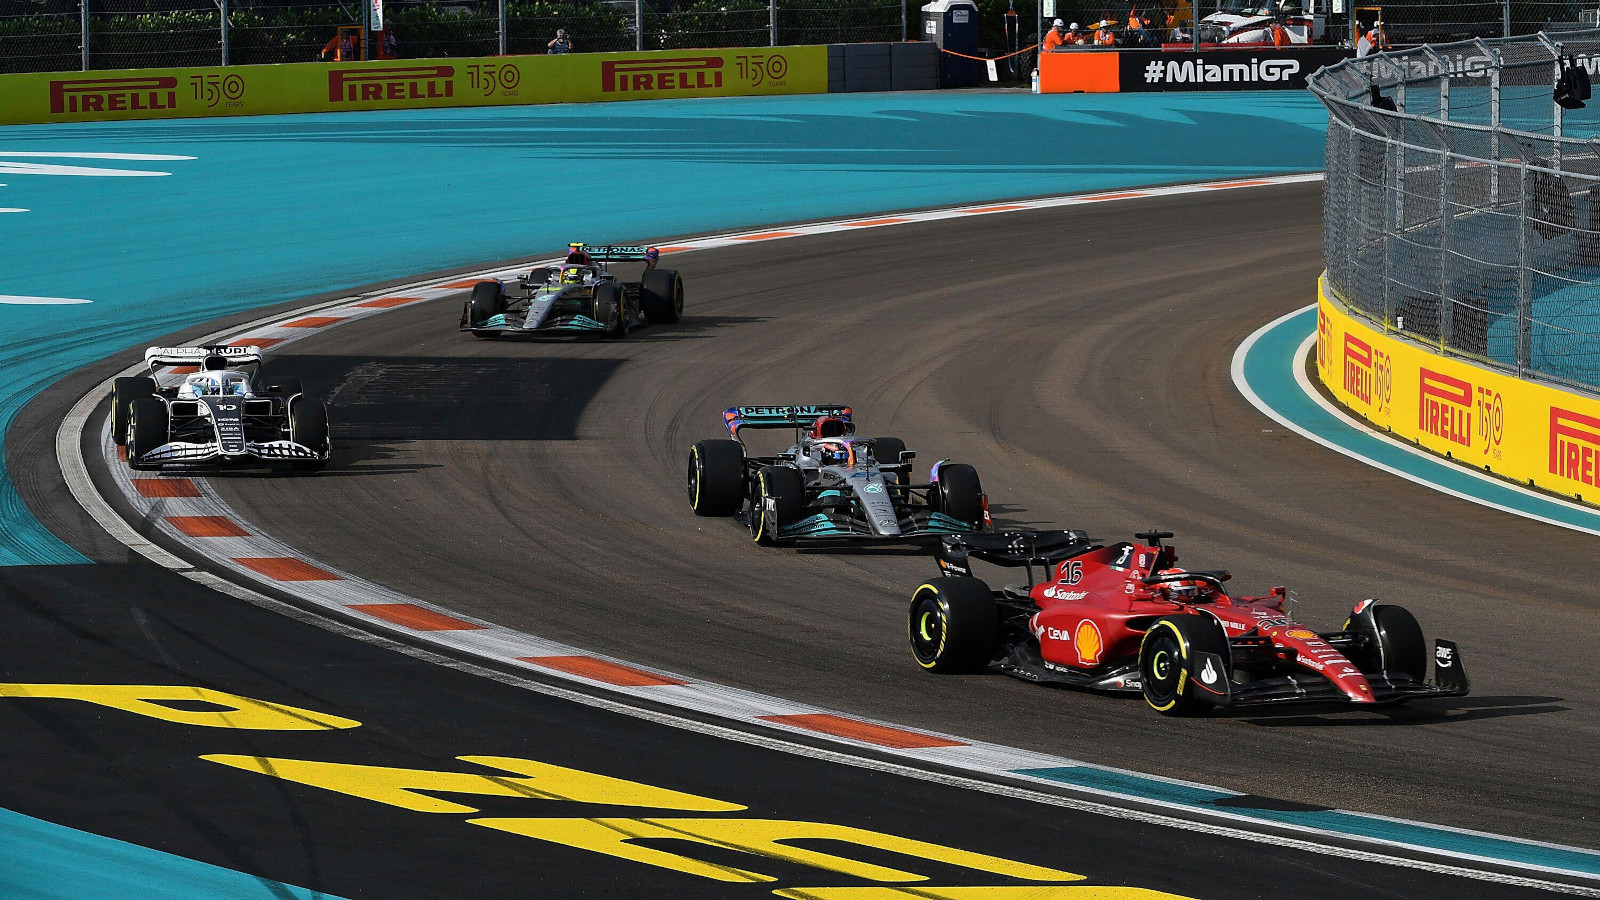 Charles Leclerc leads the two Mercedes and Pierre Gasly. Formula 1 Miami May 2022